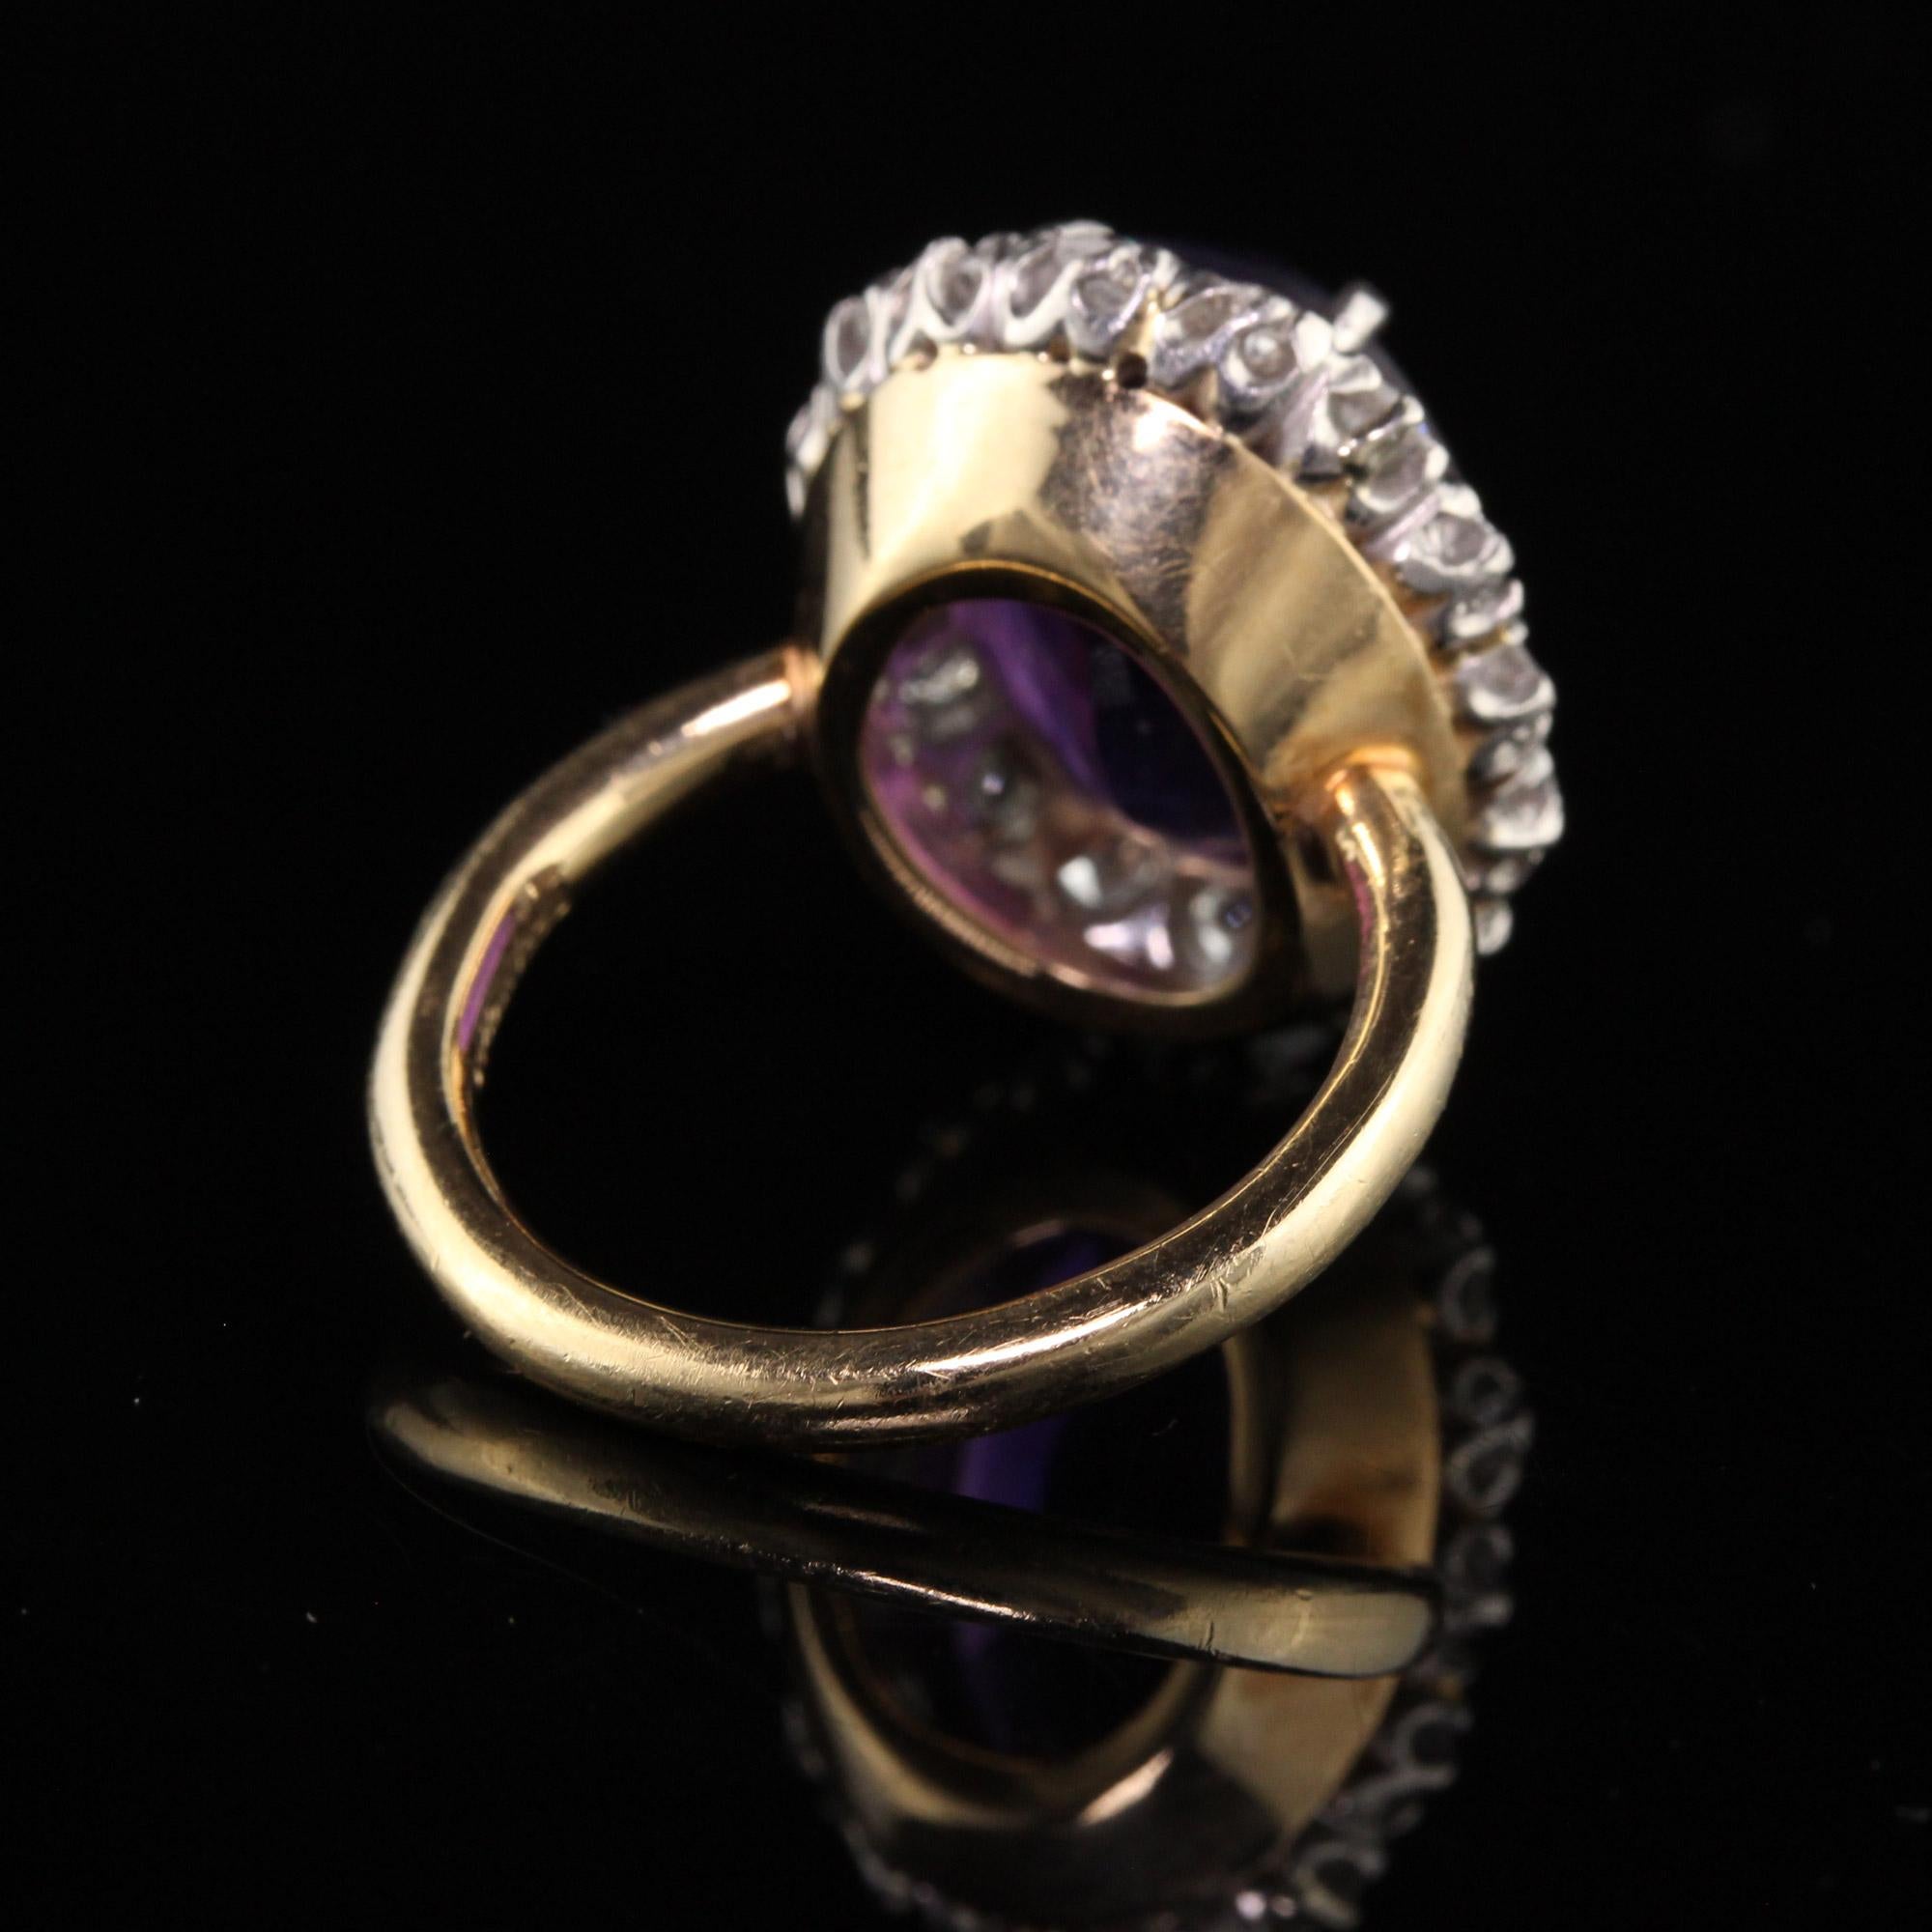 Women's Retro Tiffany and Co 18K Gold and Platinum Diamond Amethyst Engagement Ring